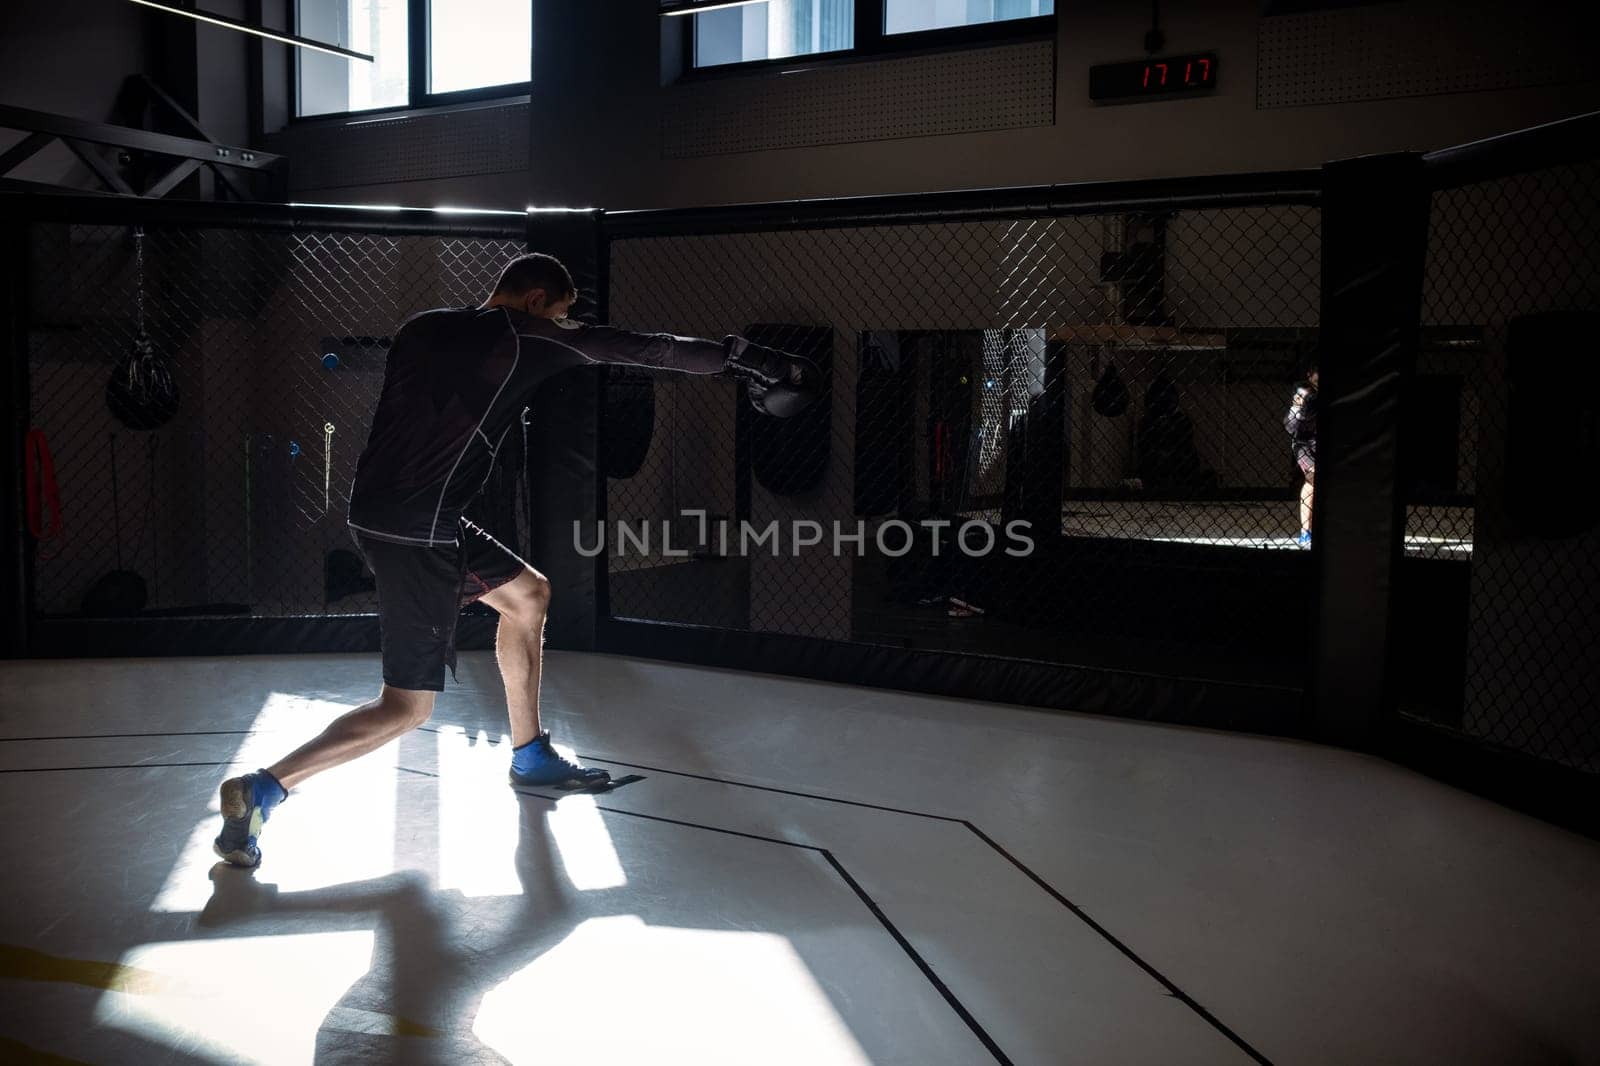 Dedicated male athlete engaging in shadowboxing session, simulating combat moves against imaginary opponent in boxing octagon cage in modern gym setting